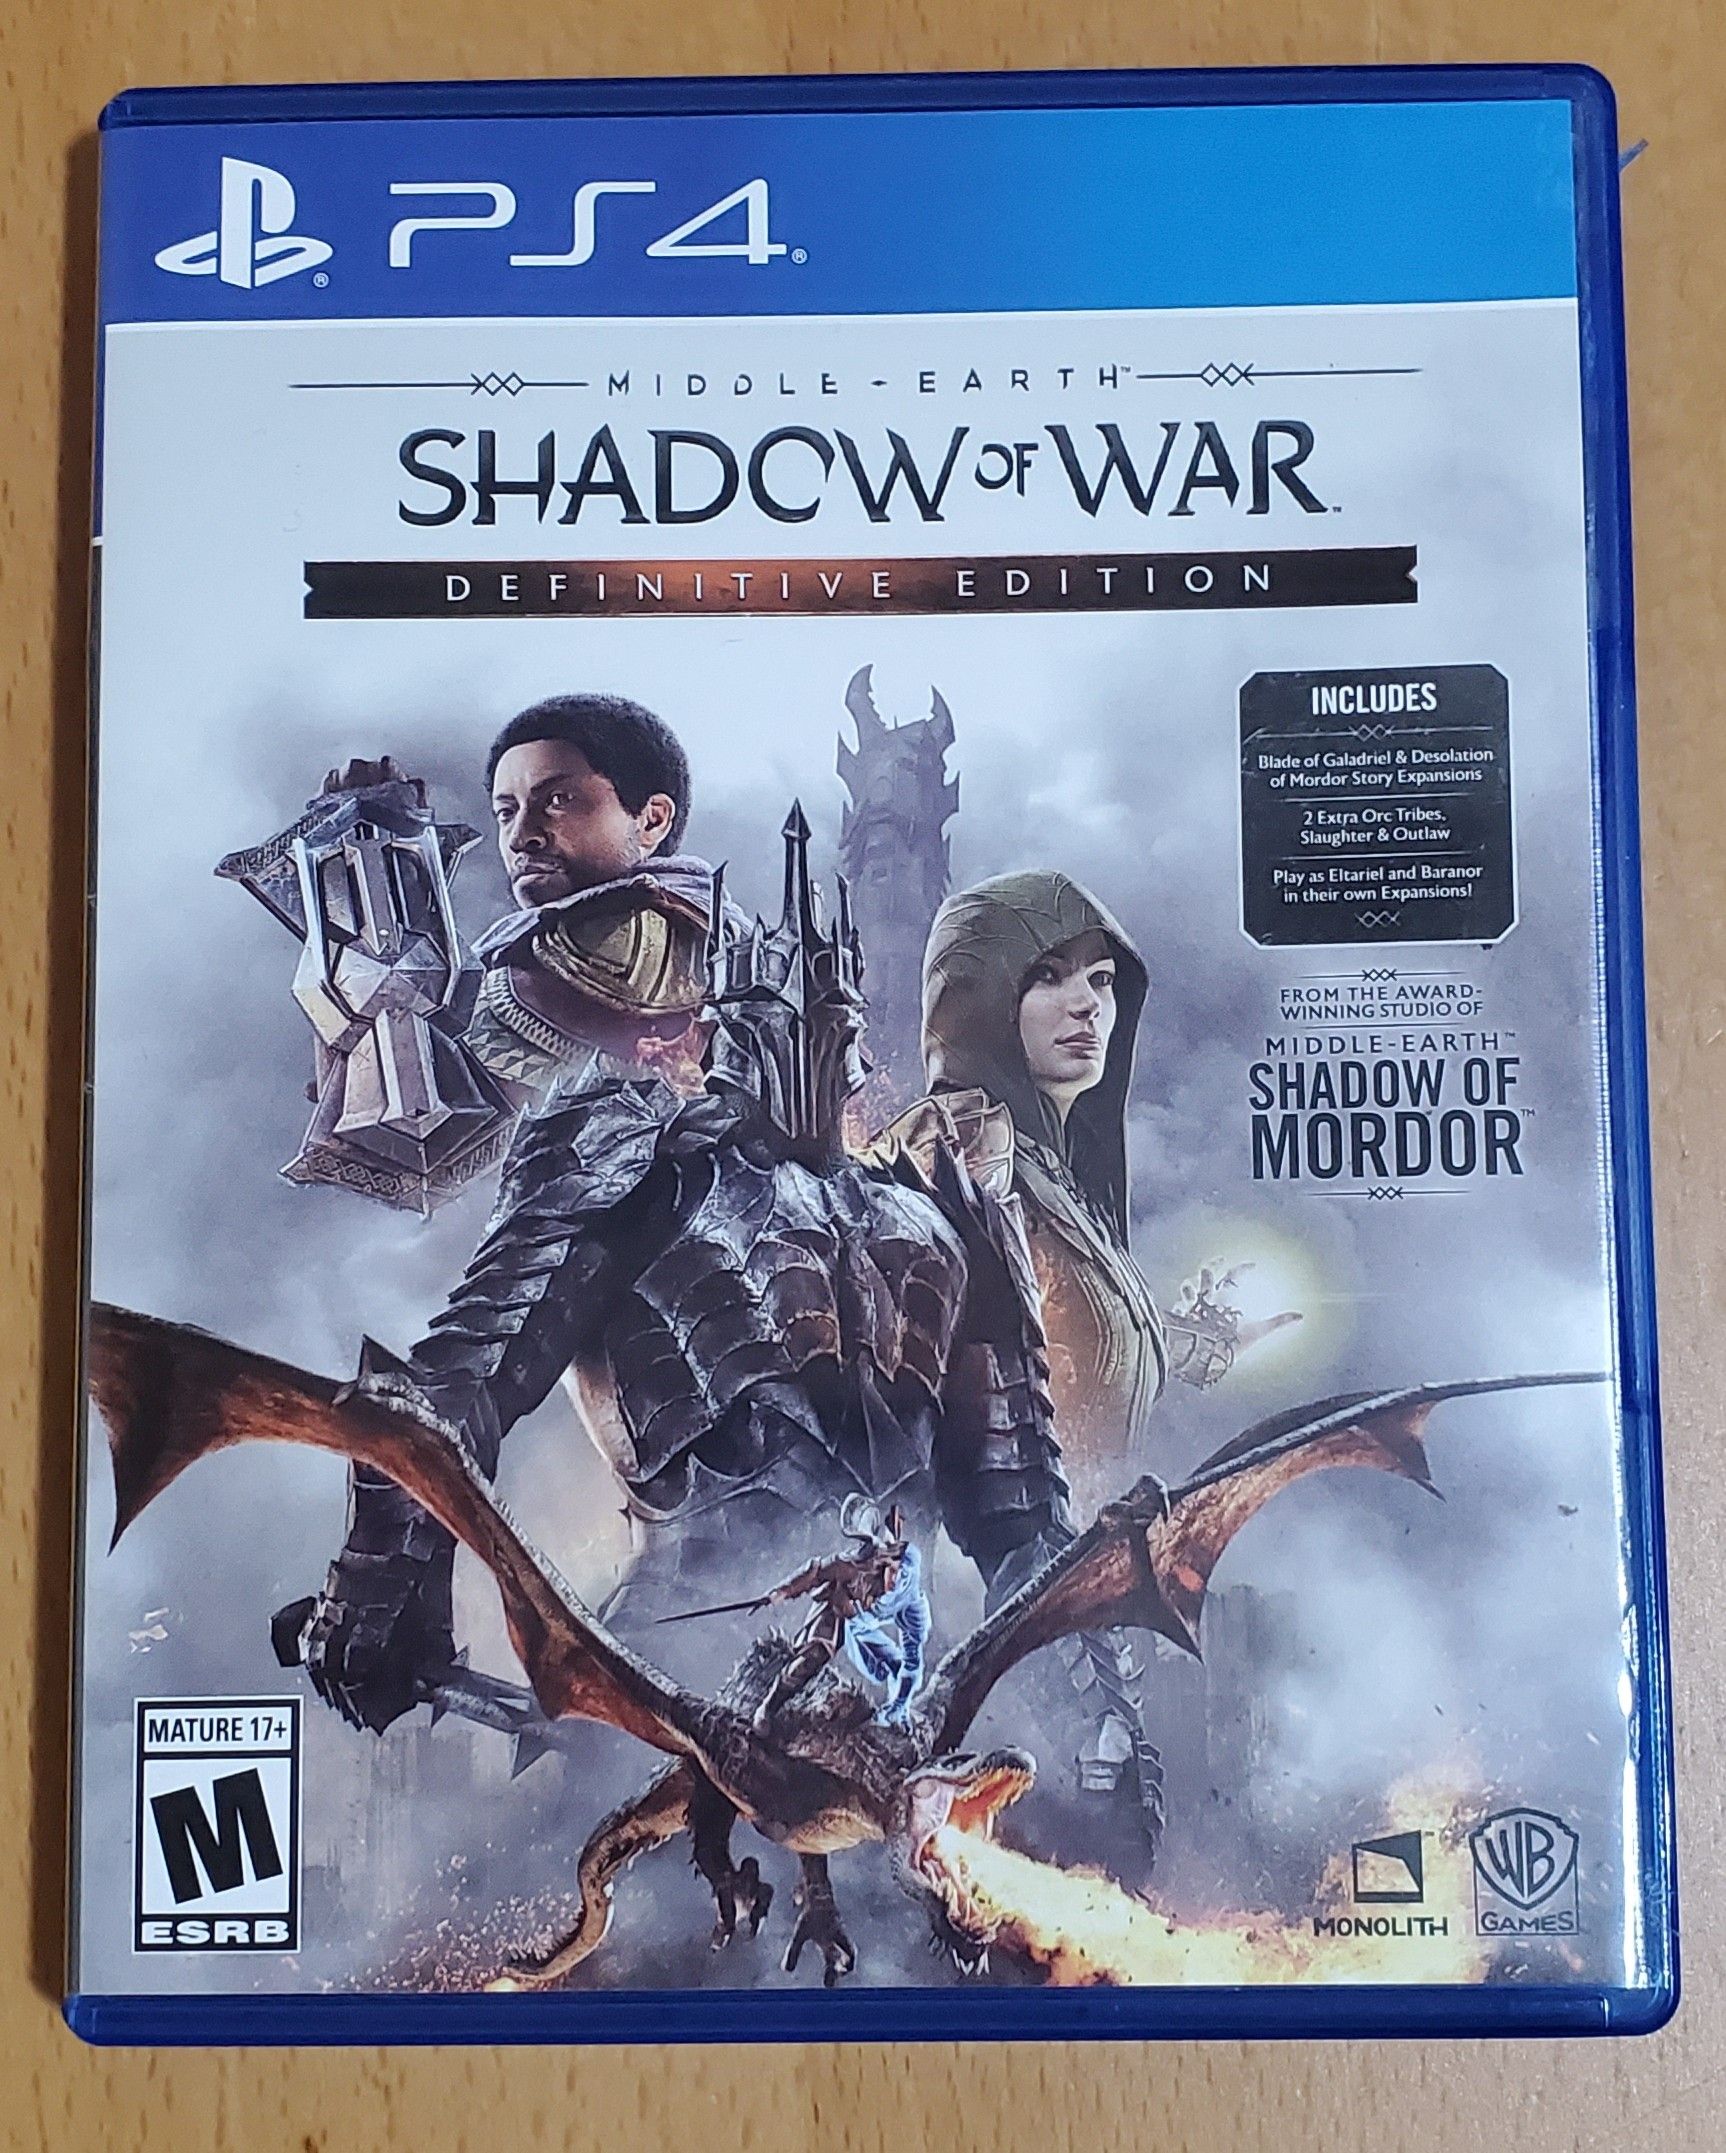 PS4 Game Shadow of War Definitive Edition and NBA2K18